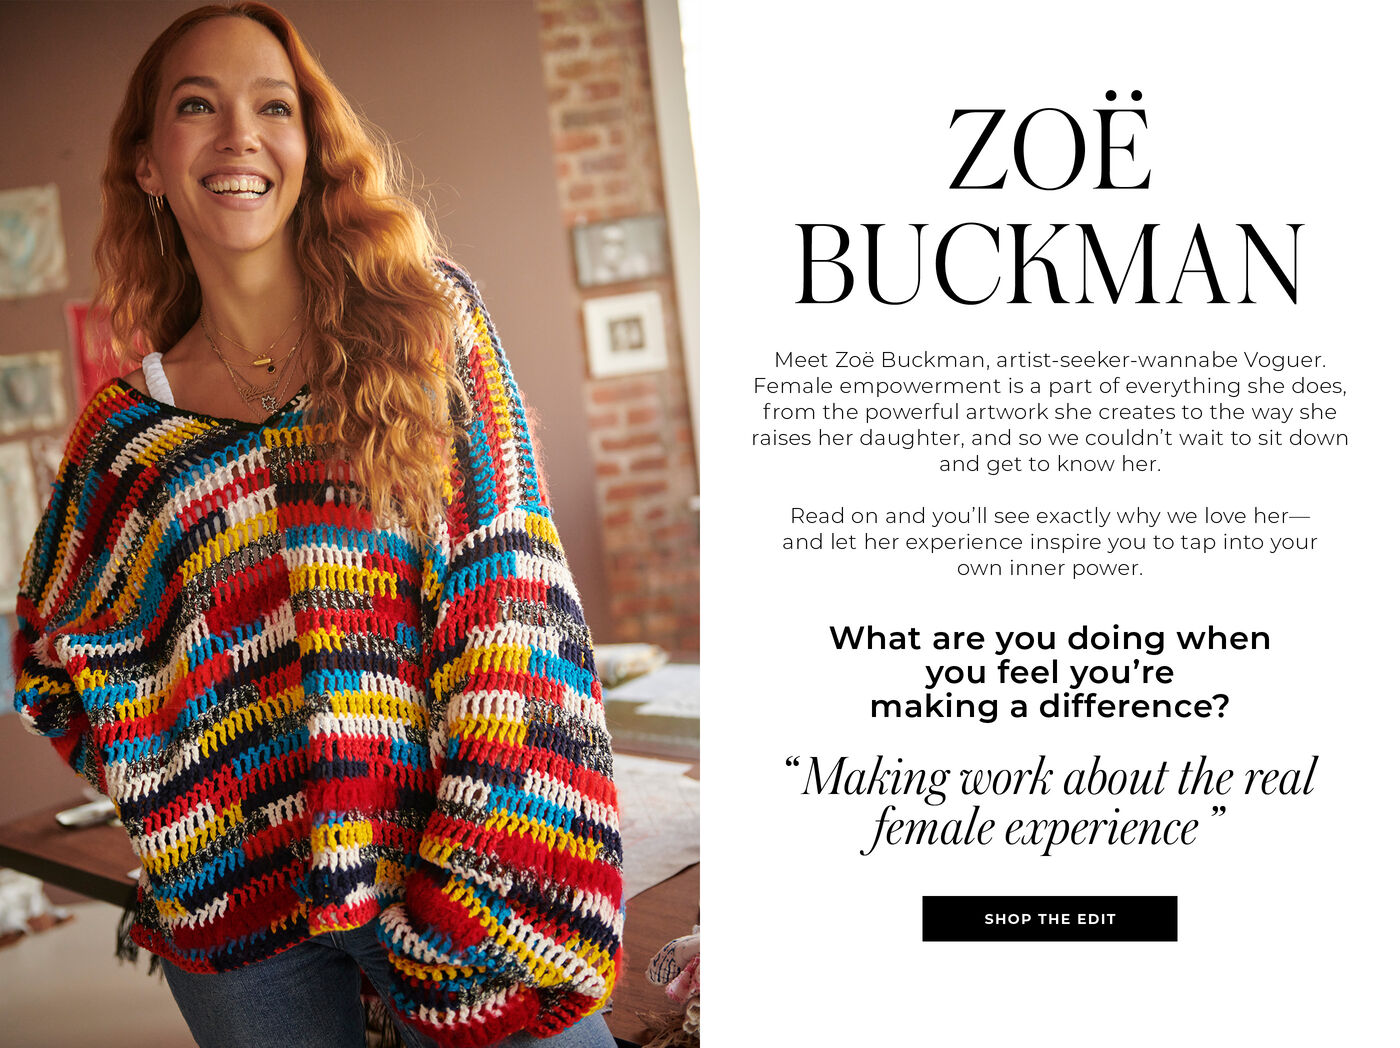 "ZOE BUCKMAN Meet Zoe Buckman, artist-seeker-wannabe Voguer. Female empowerment is a part of everything she does, from the powerful artwork she creates to the way she raises her daughter, and so we couldn't wait to sit down and get to know her. Read on and you'll see exactly why we love her- and let her experience inspire you to tap into your own inner power. What are you doing when you feel you're making a difference? ""Making work about the real female experience"""